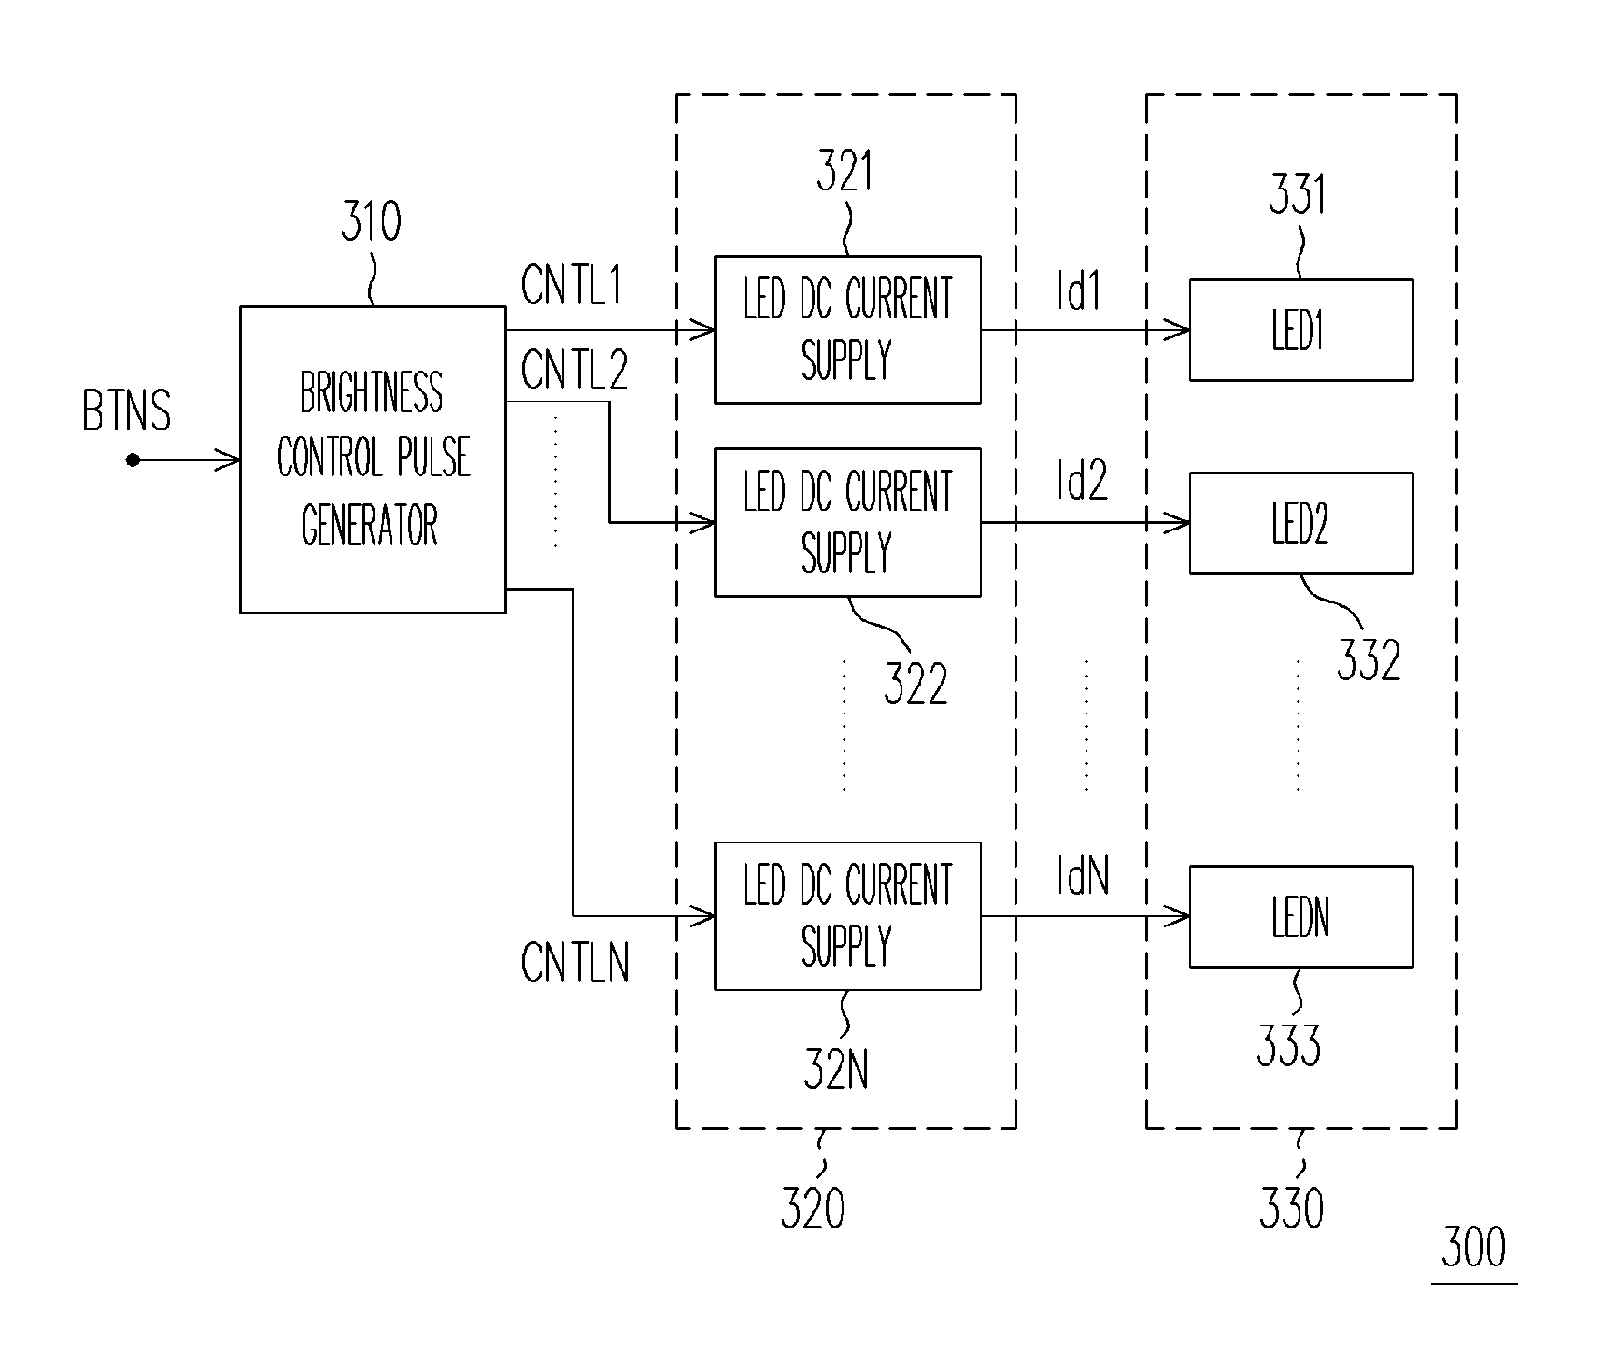 APPARATUS OF LIGHT SOURCE AND ADJUSTABLE CONTROL CIRCUIT FOR LEDs